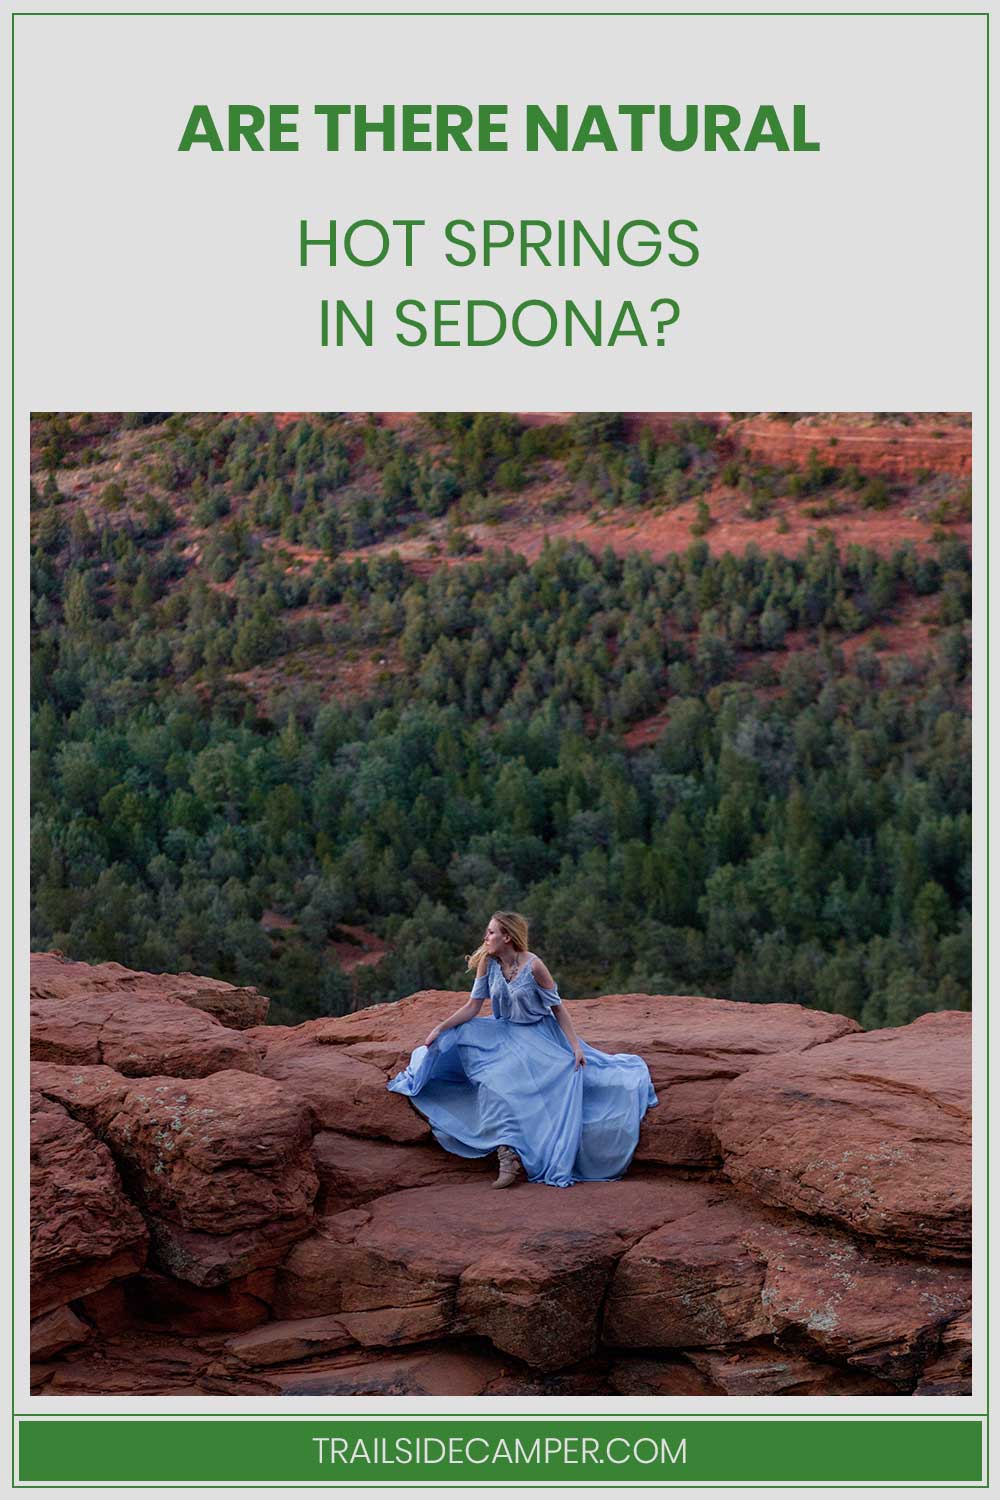 Woman in blue dress sitting on red rocks - Are There Natural Hot Springs in Sedona?